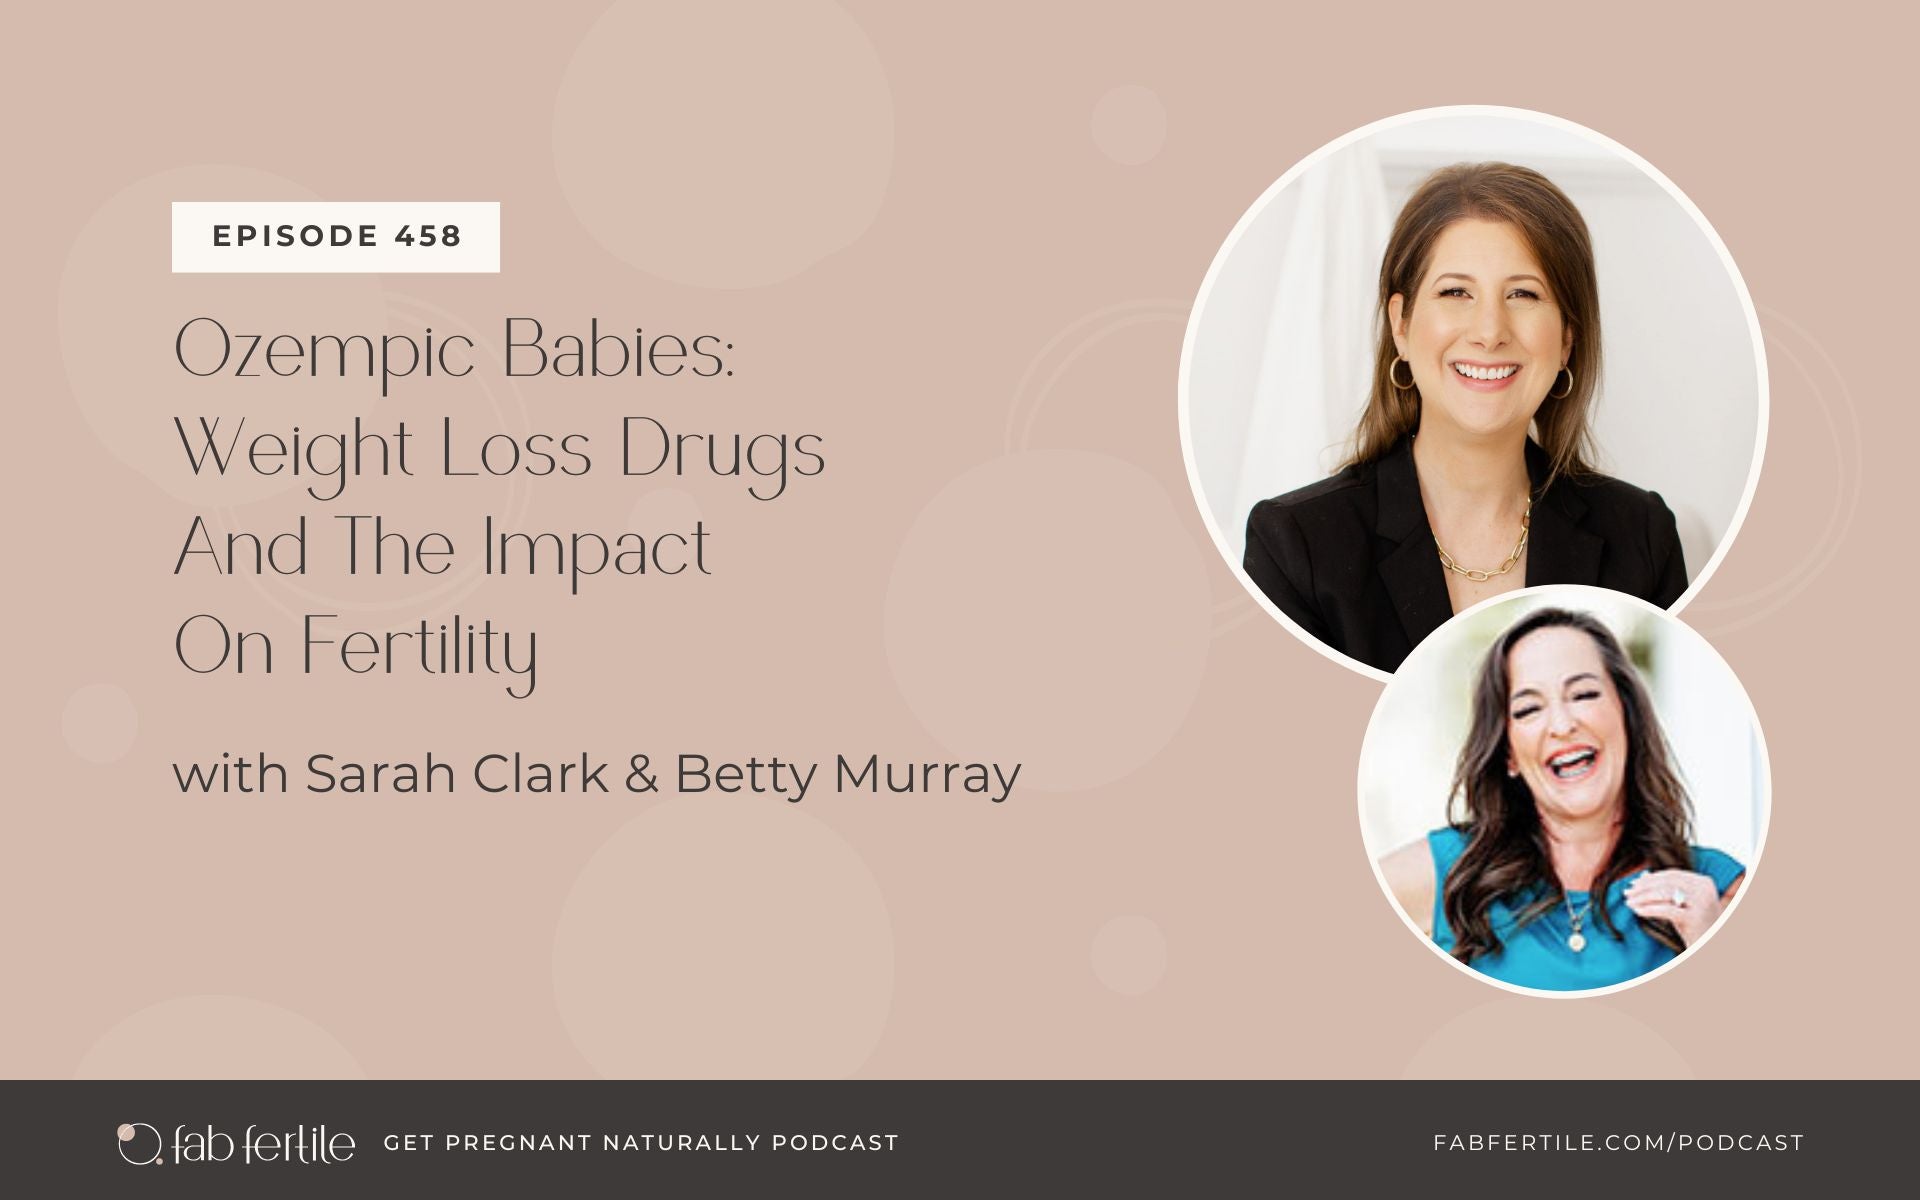 Ozempic Babies: Weight Loss Drugs And The Impact On Fertility with Betty Murray